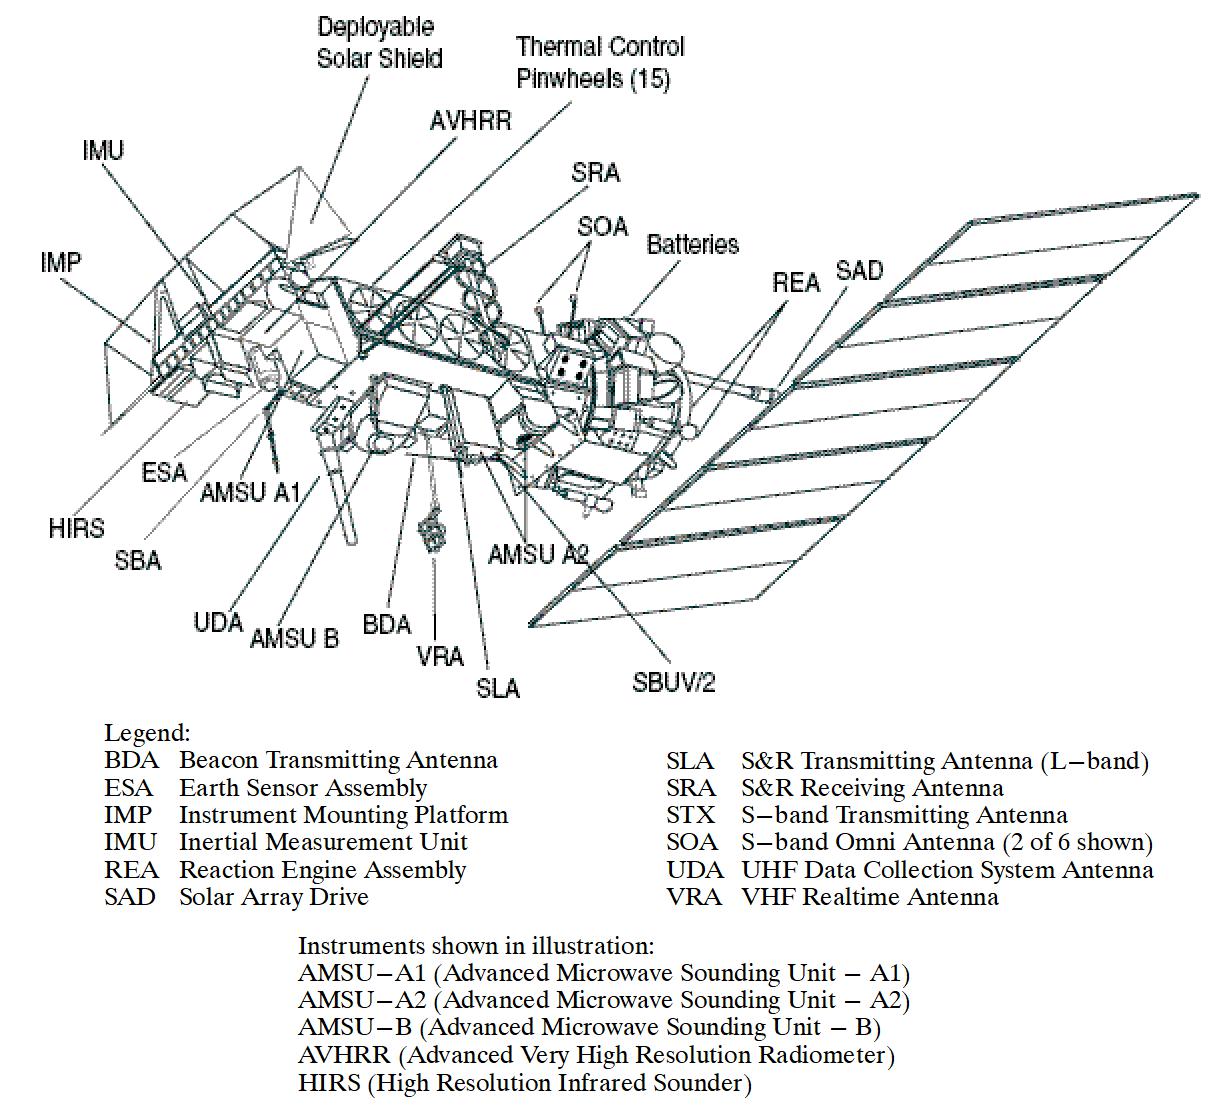 Figure 4: Line drawing of the 5th generation satellite configuration (image credit: NASA)